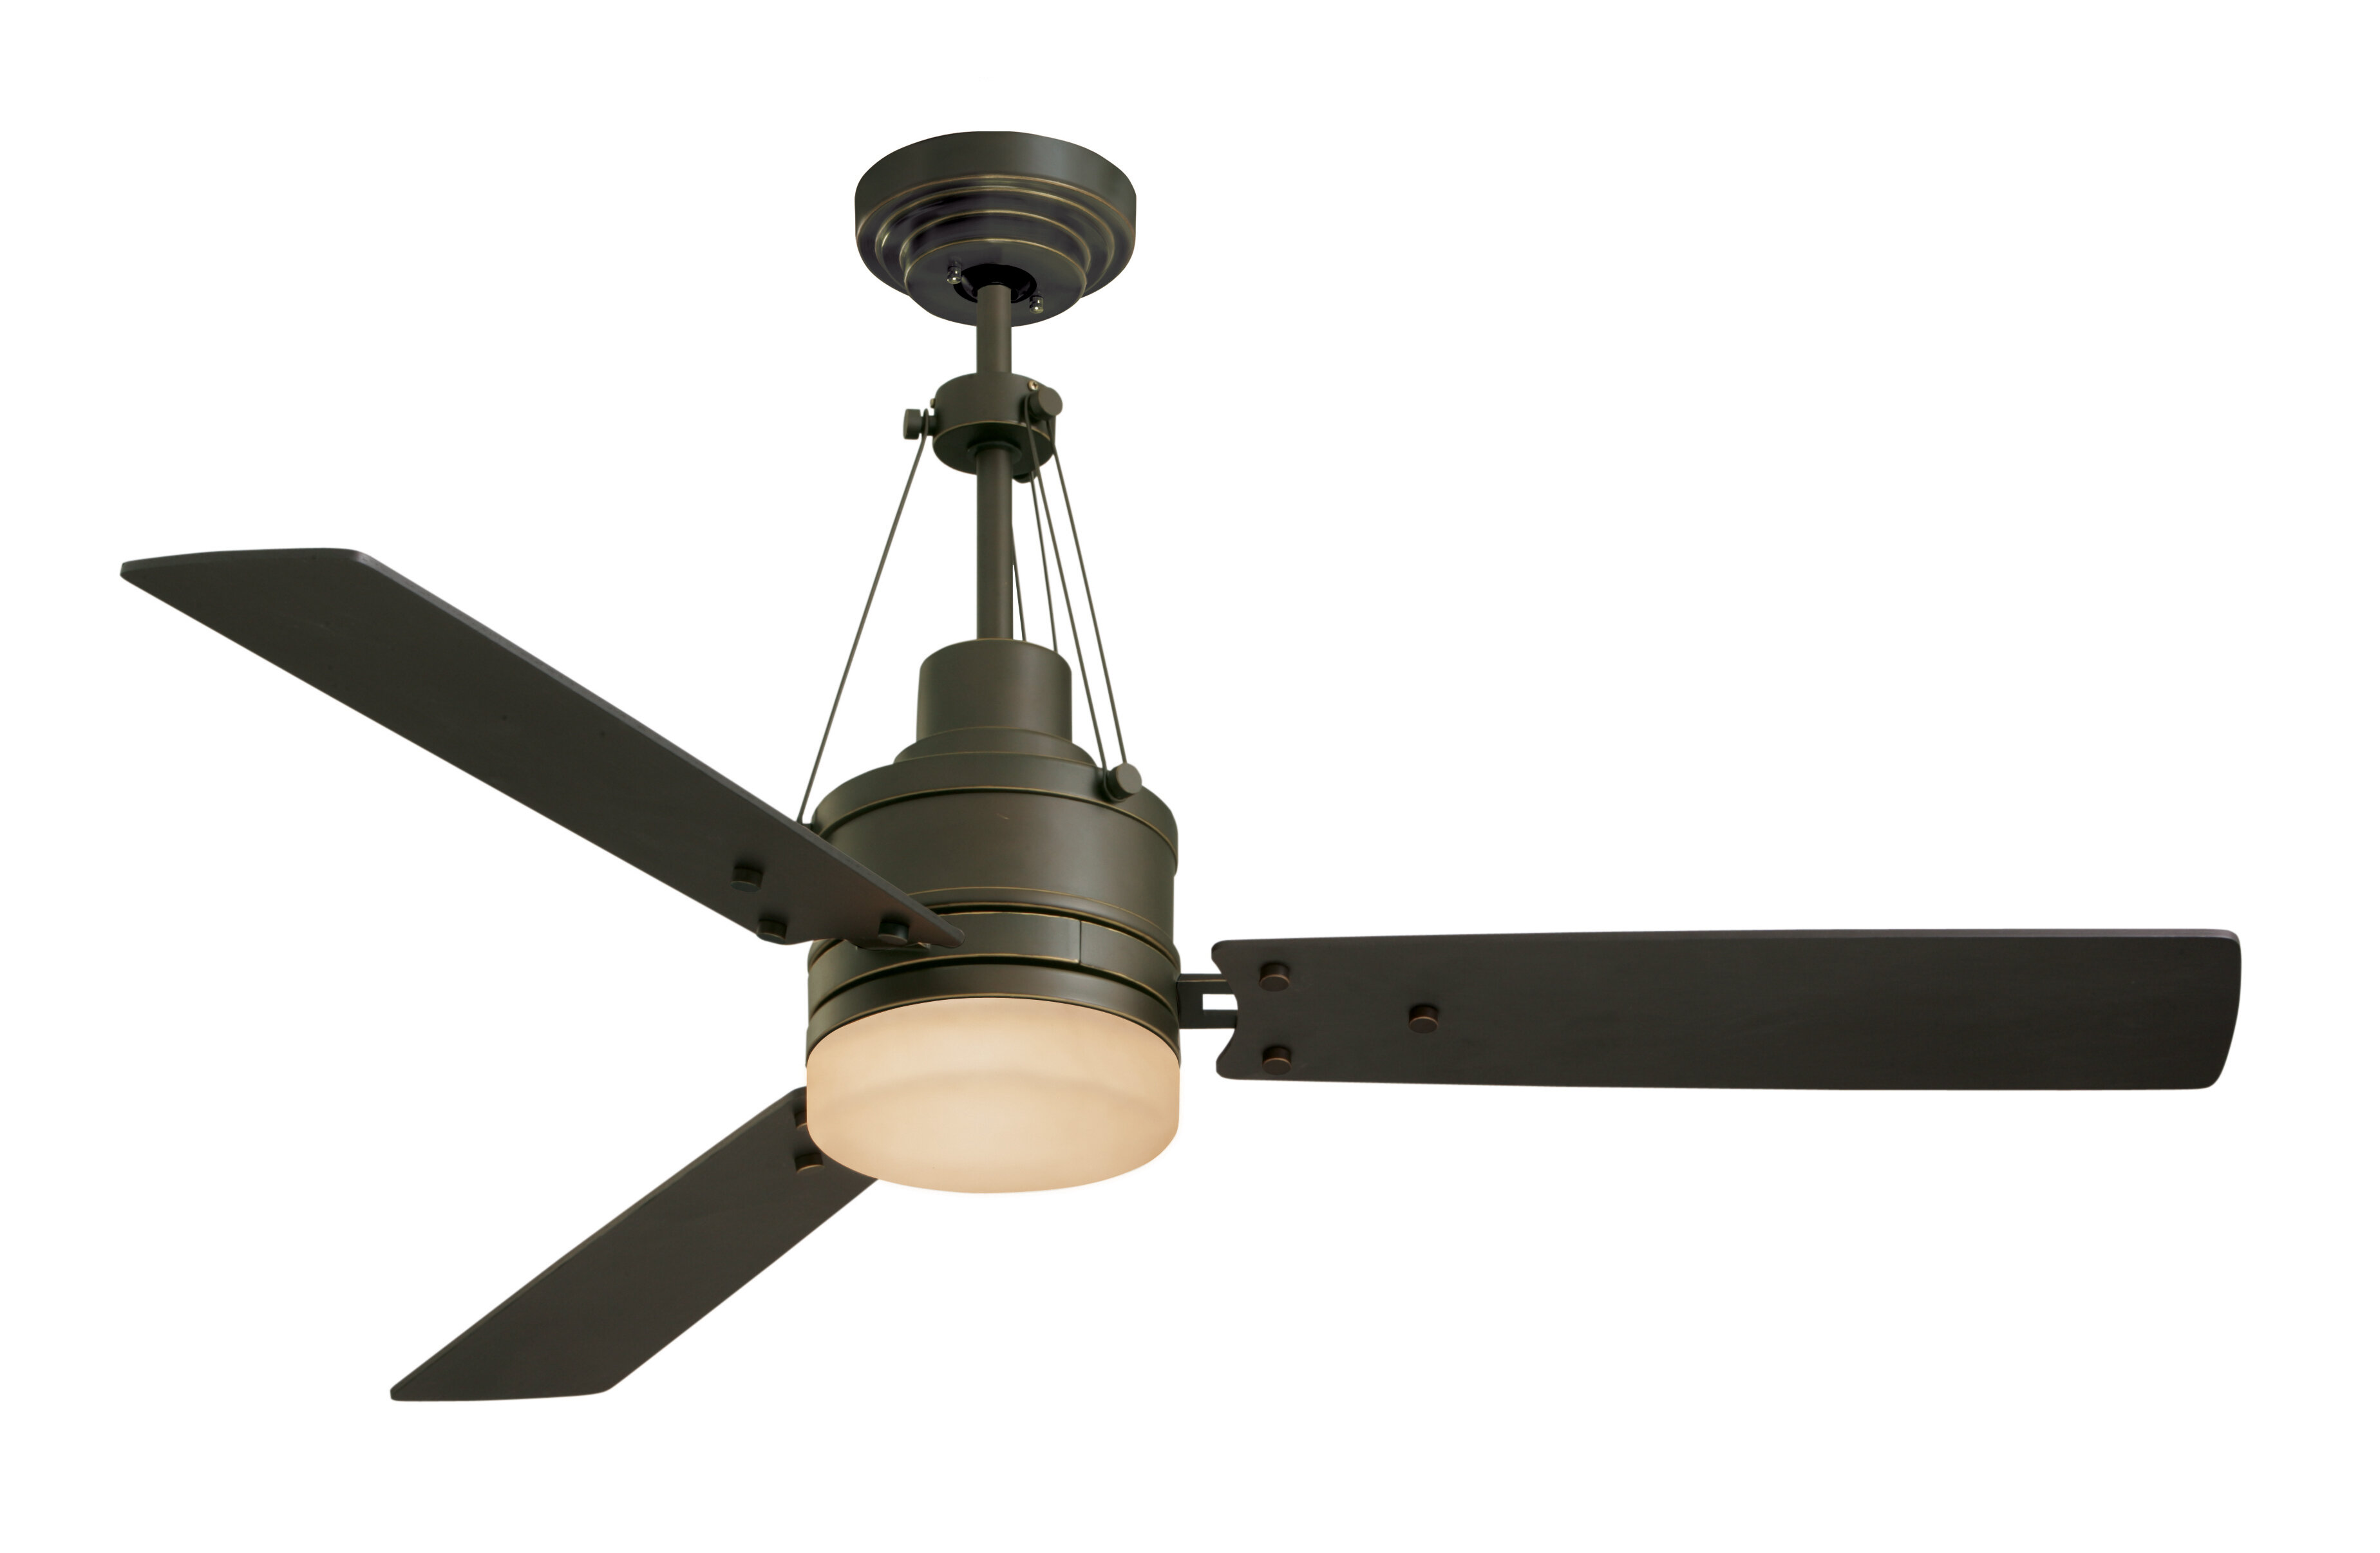 Williston Forge 54 Hamler 3 Blade Led Ceiling Fan With Remote